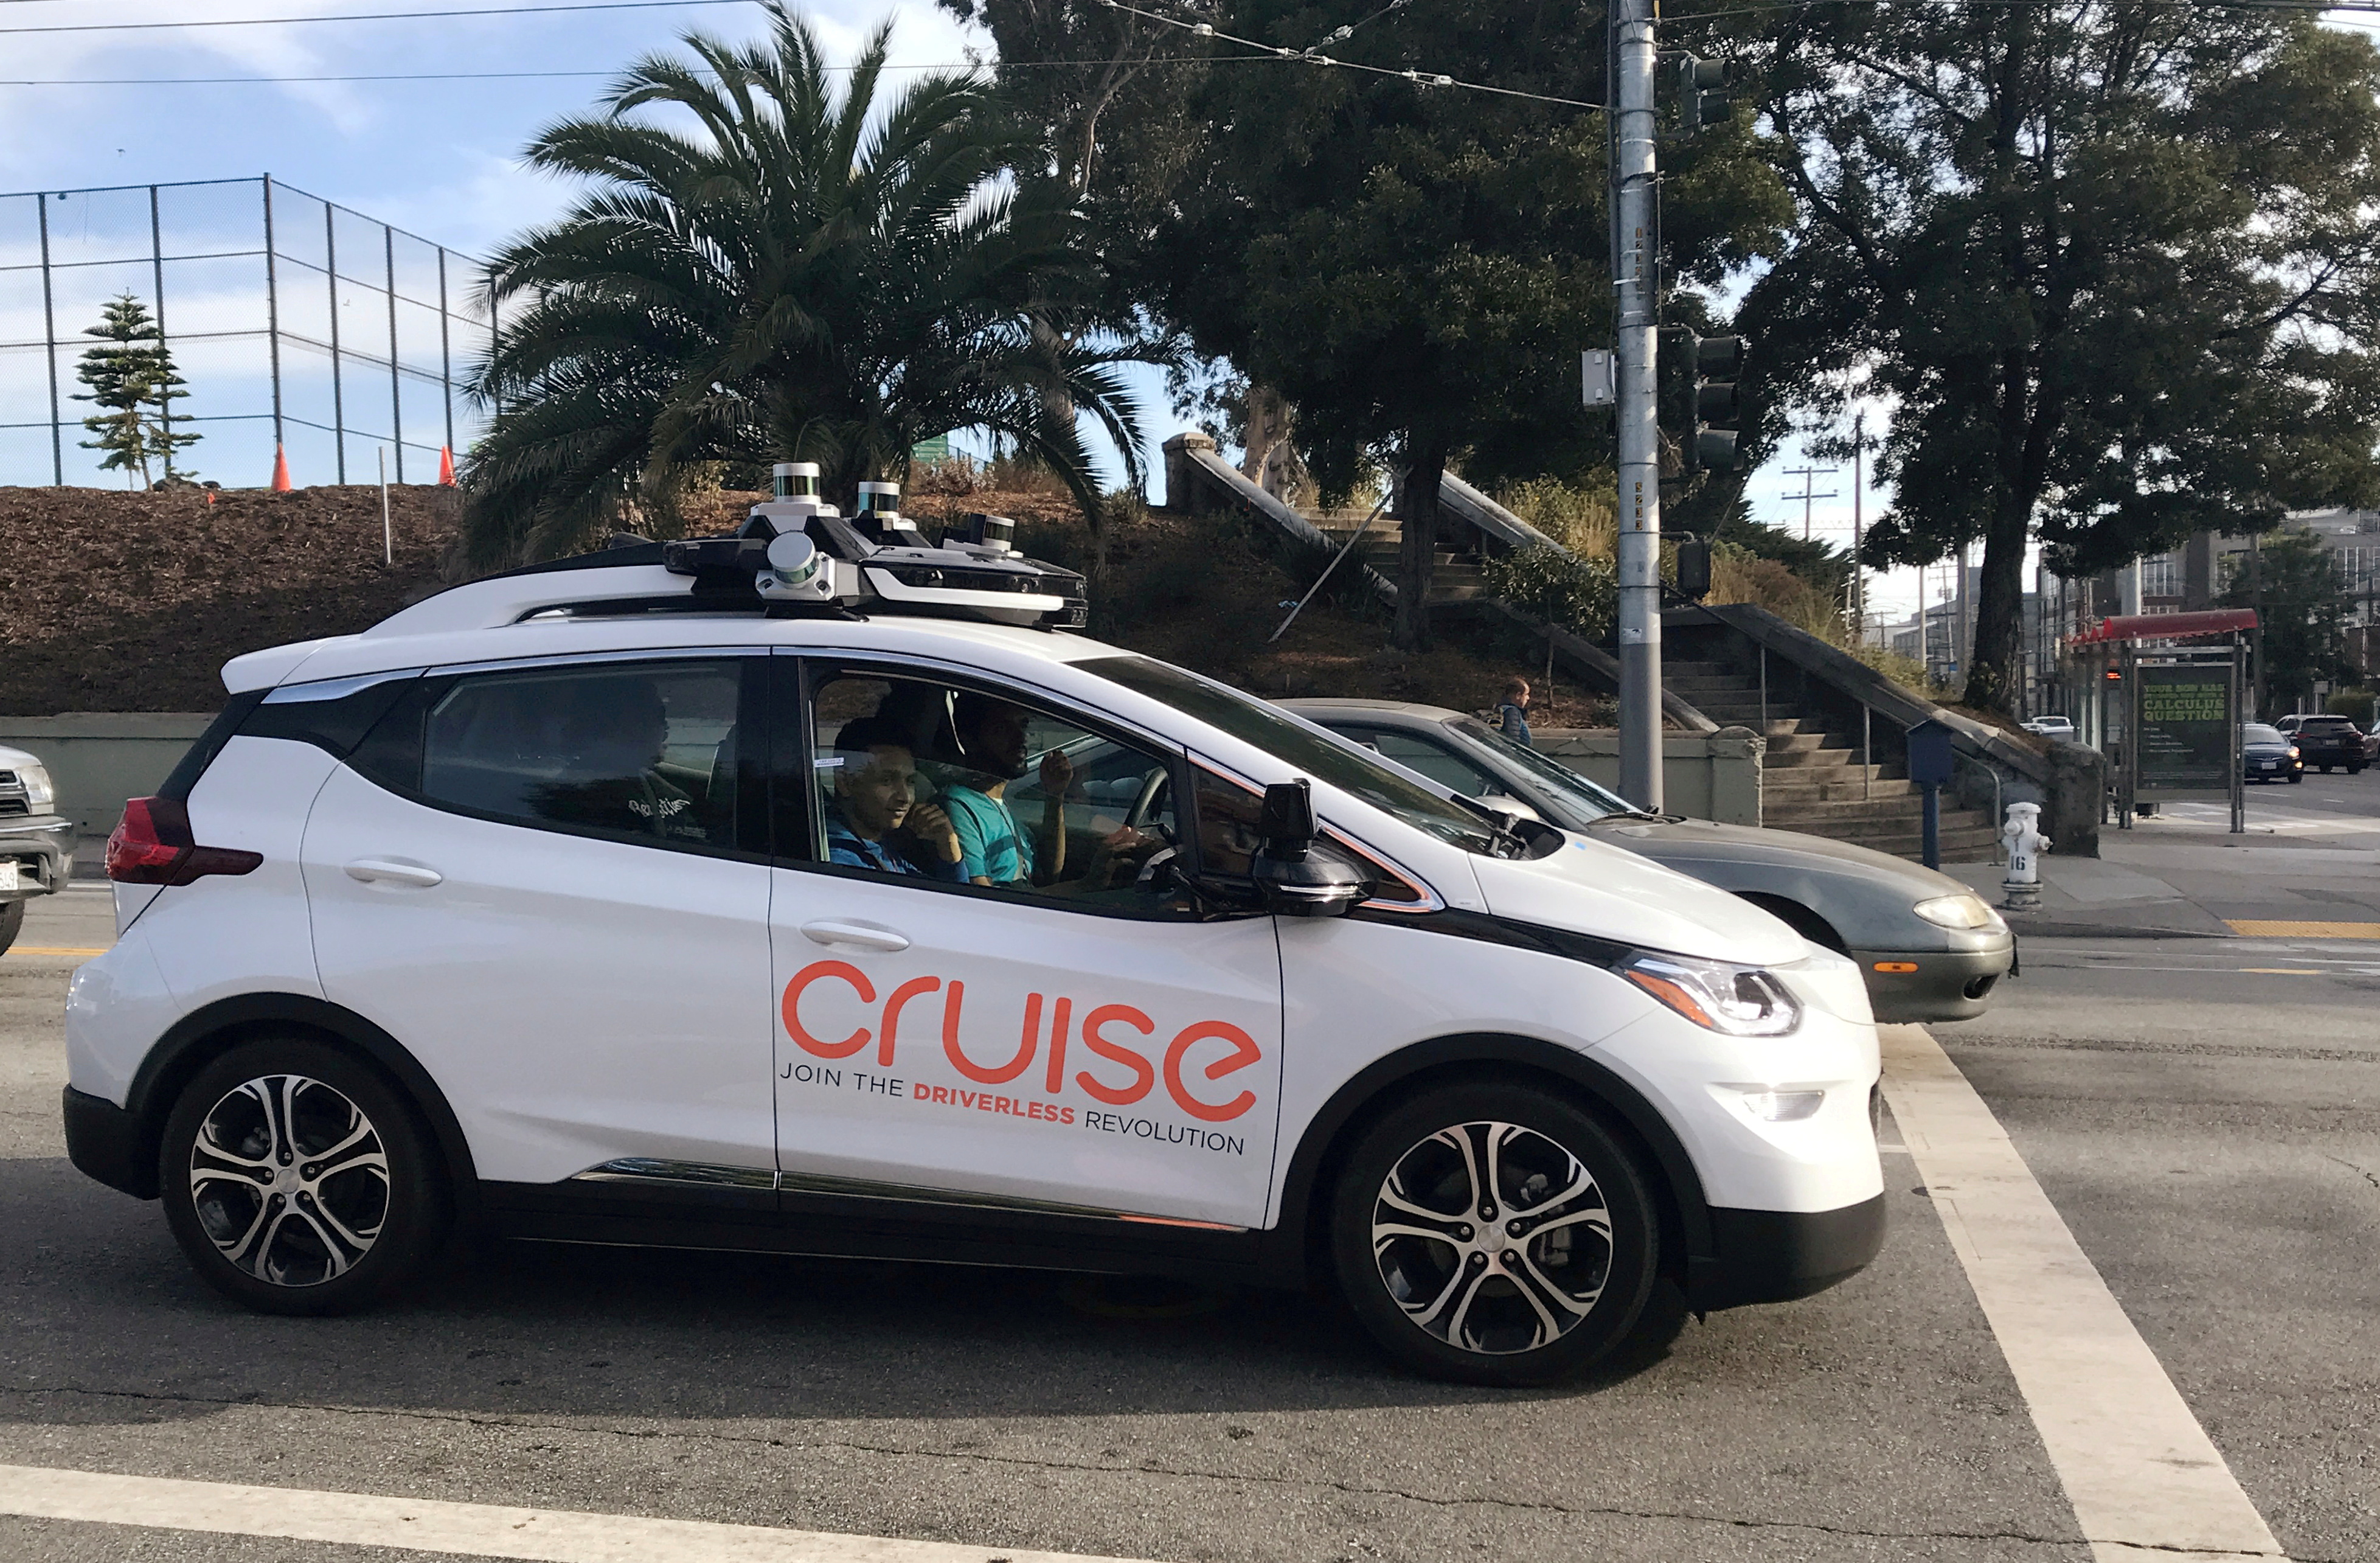 A Cruise self-driving car, which is owned by General Motors, is seen outside the company’s headquarters in San Francisco